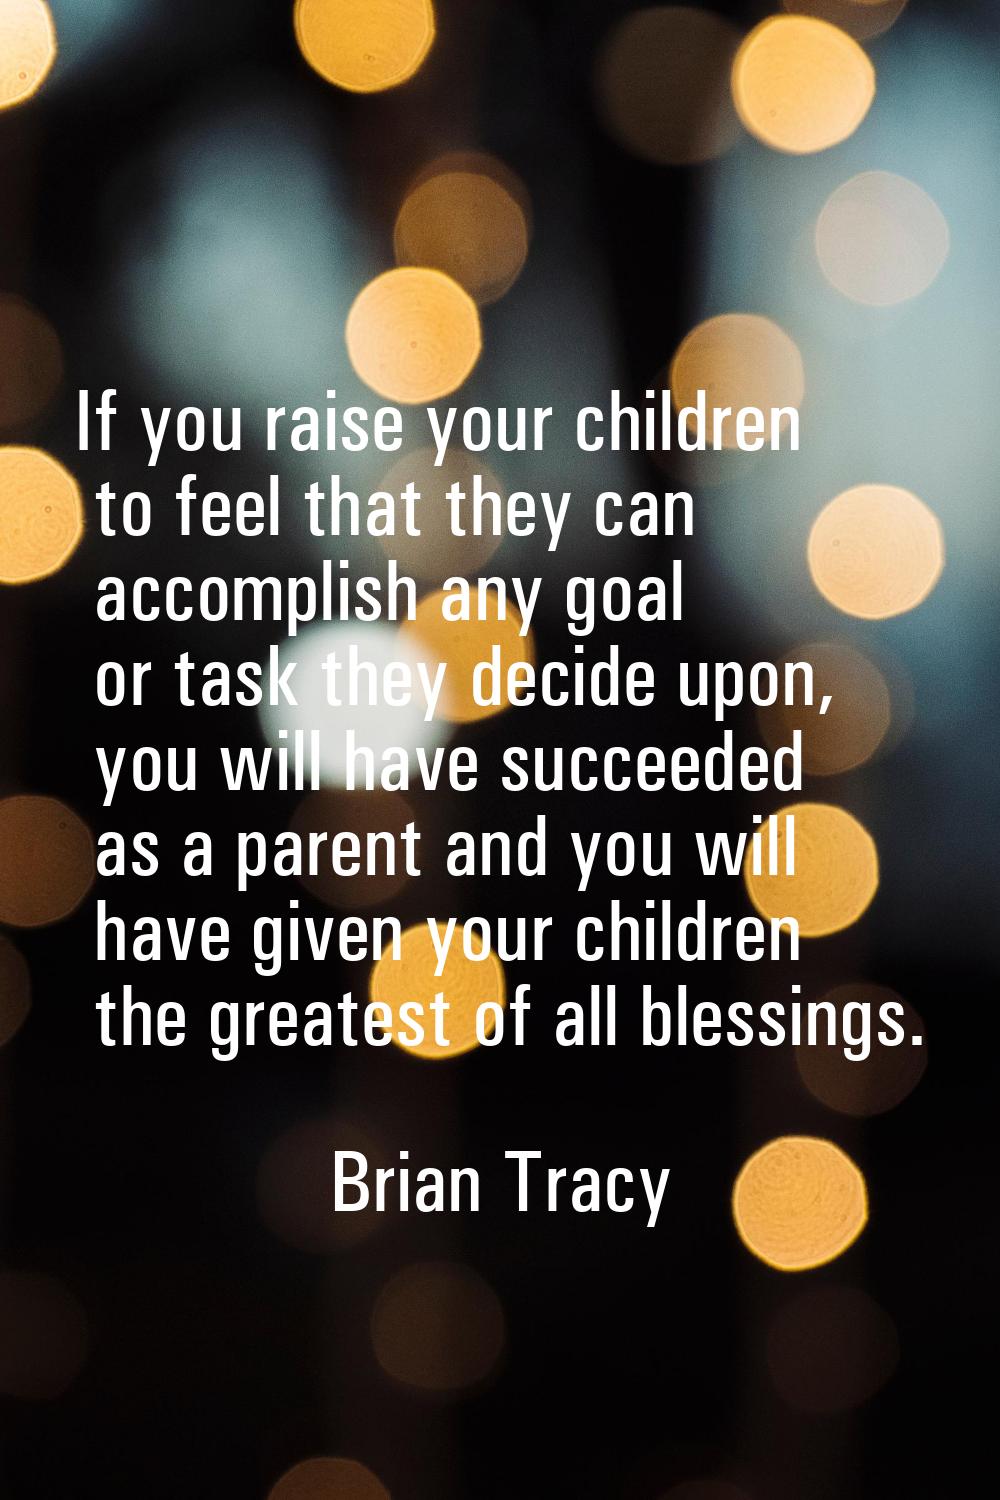 If you raise your children to feel that they can accomplish any goal or task they decide upon, you 